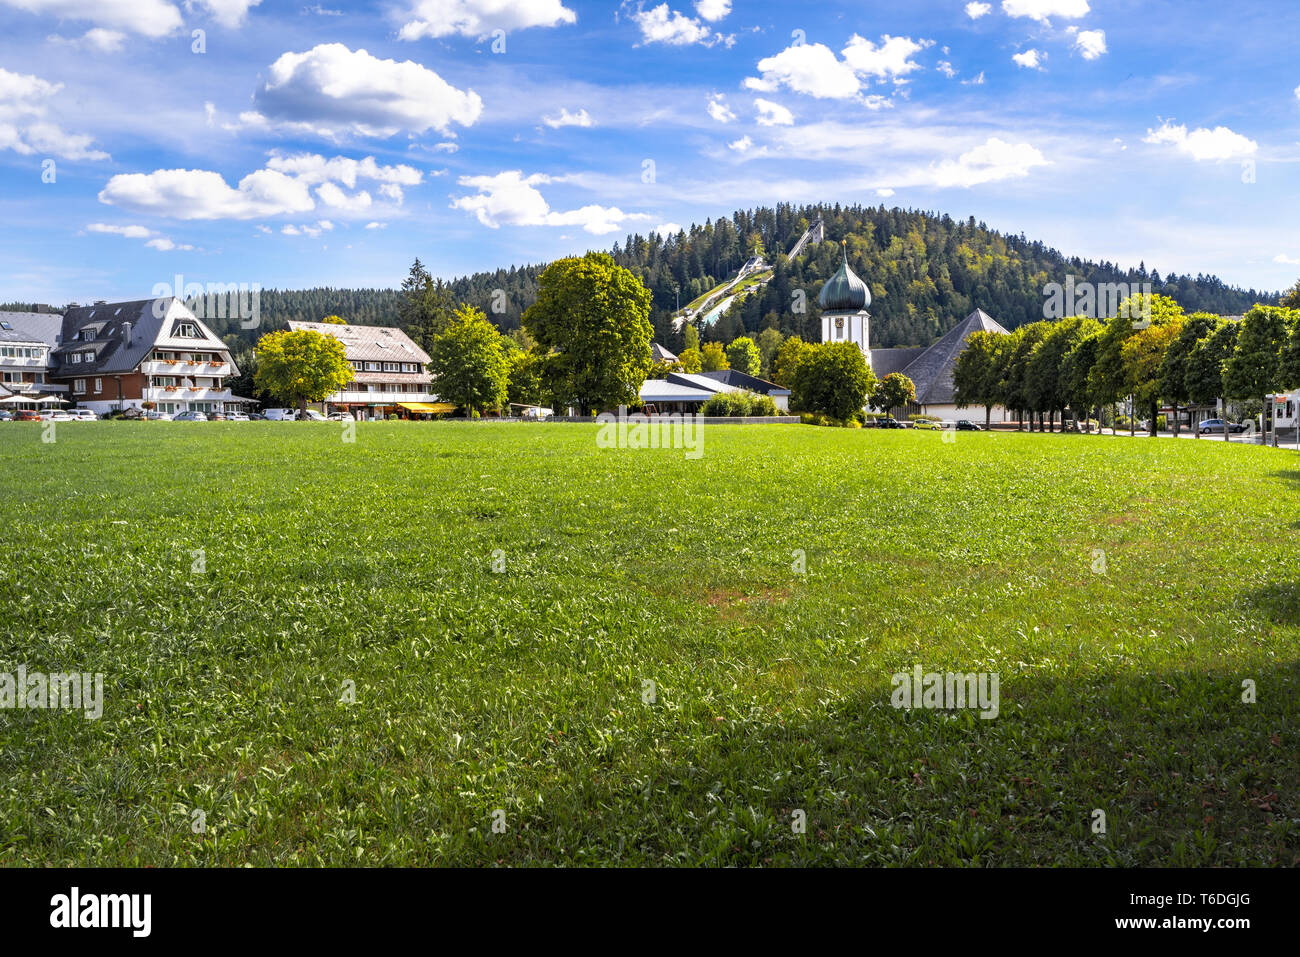 the community Hinterzarten with a view to the ski jumping complex Adler Ski Stadium, High Black Forest, Germany, district of Freiburg Stock Photo